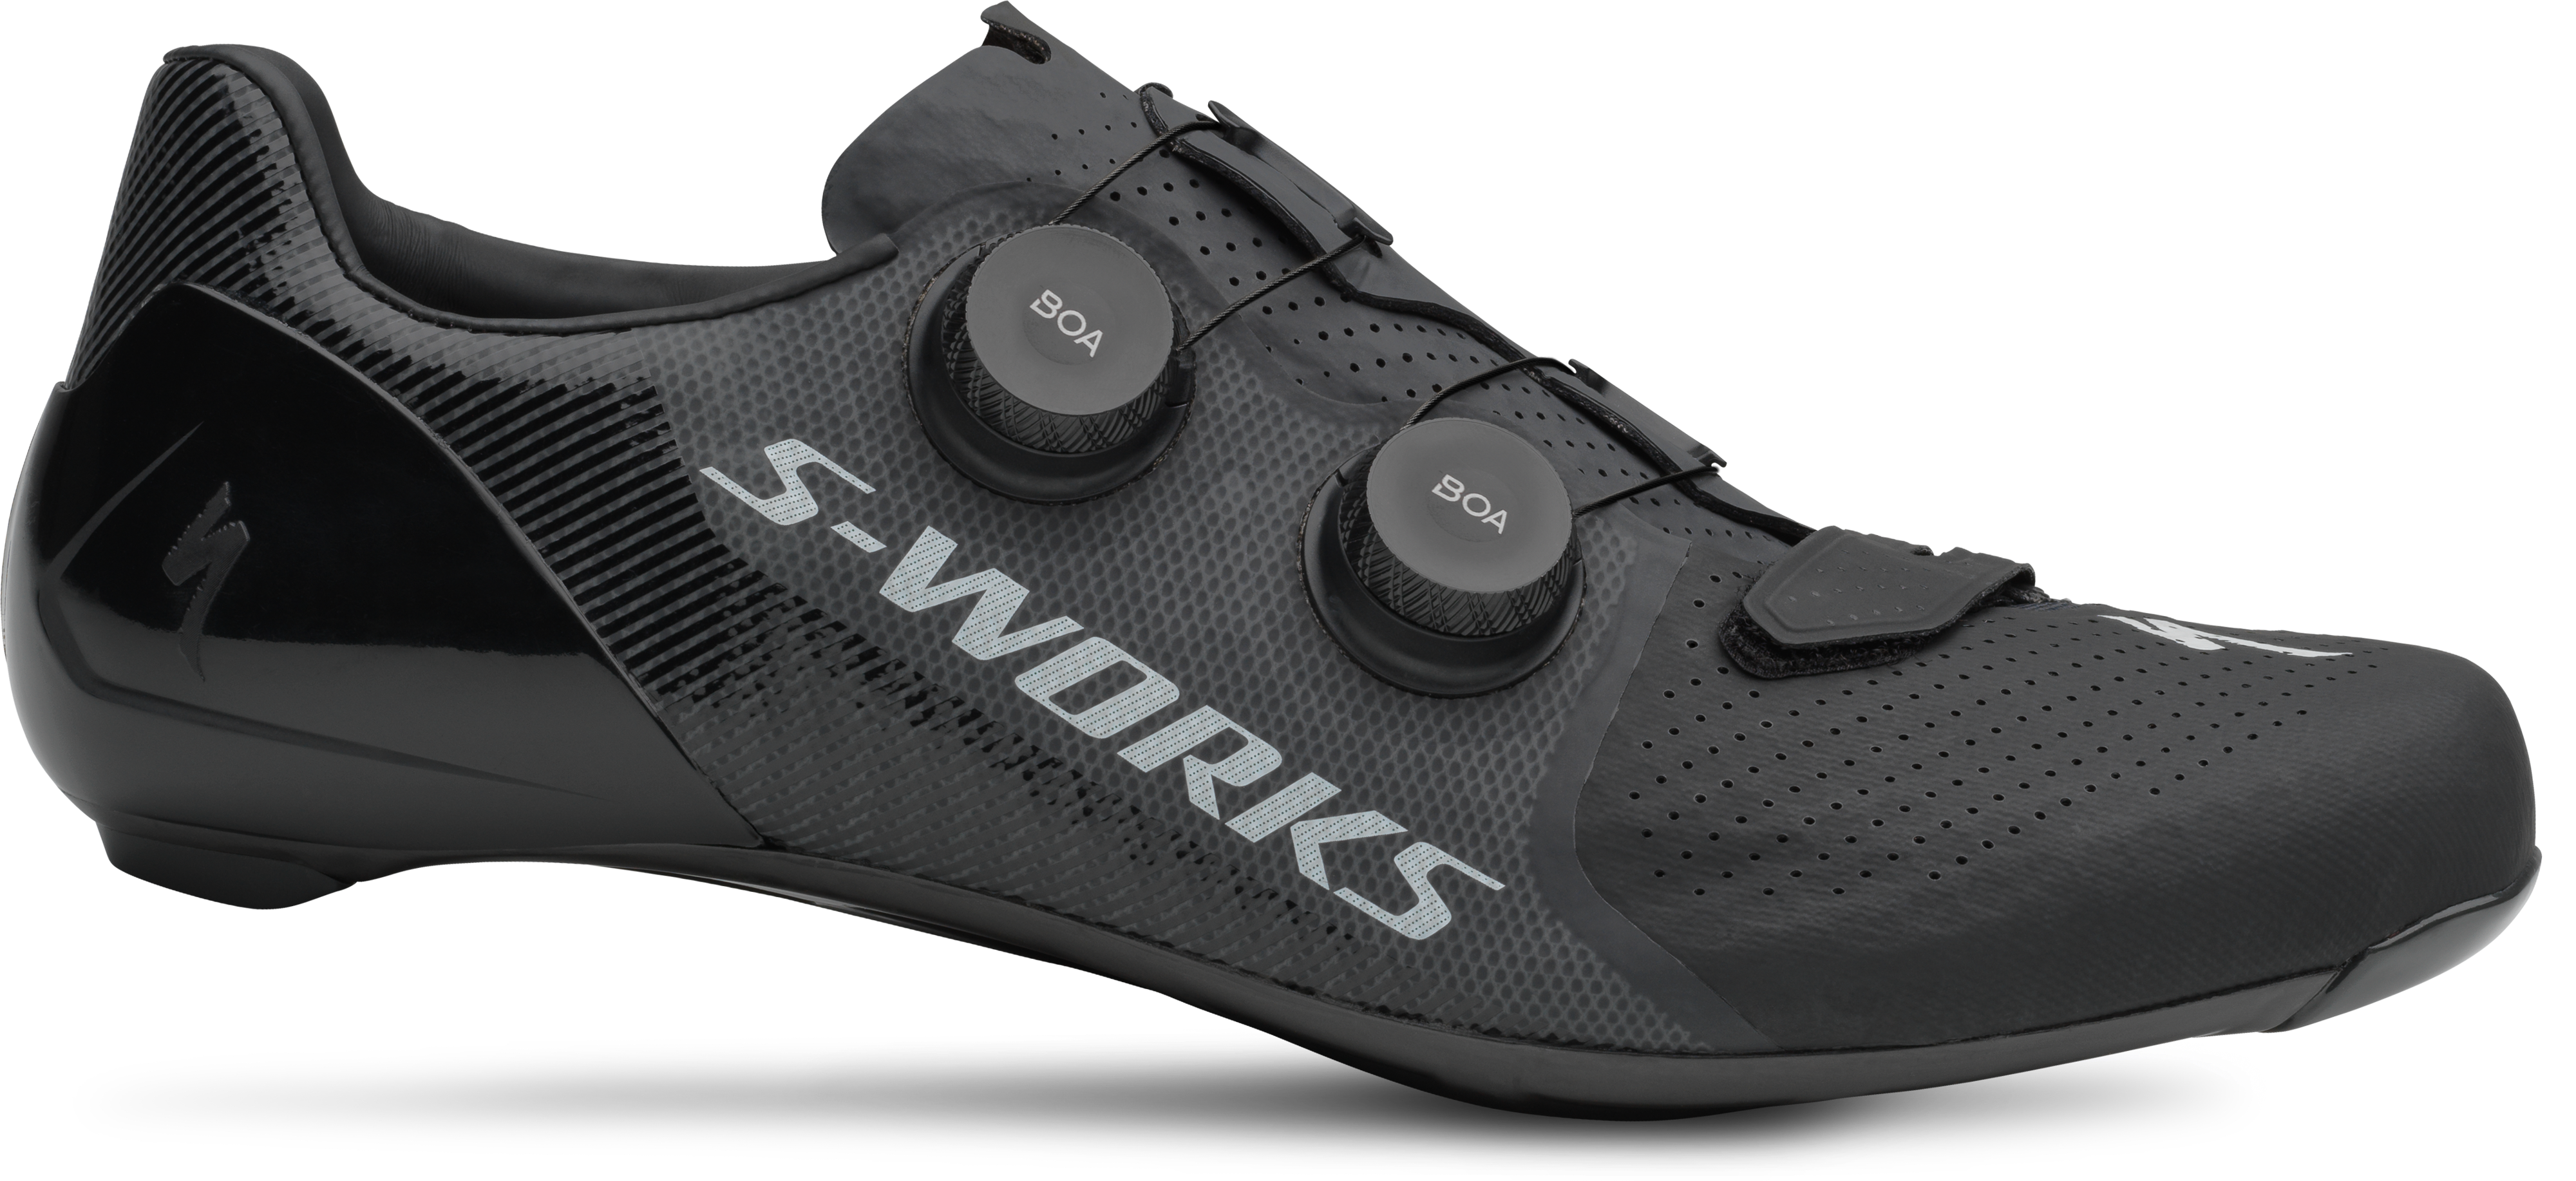 SPECIALIZED S-WORKS 7 RDビンディングシューズ 23.5ビンディングシューズ